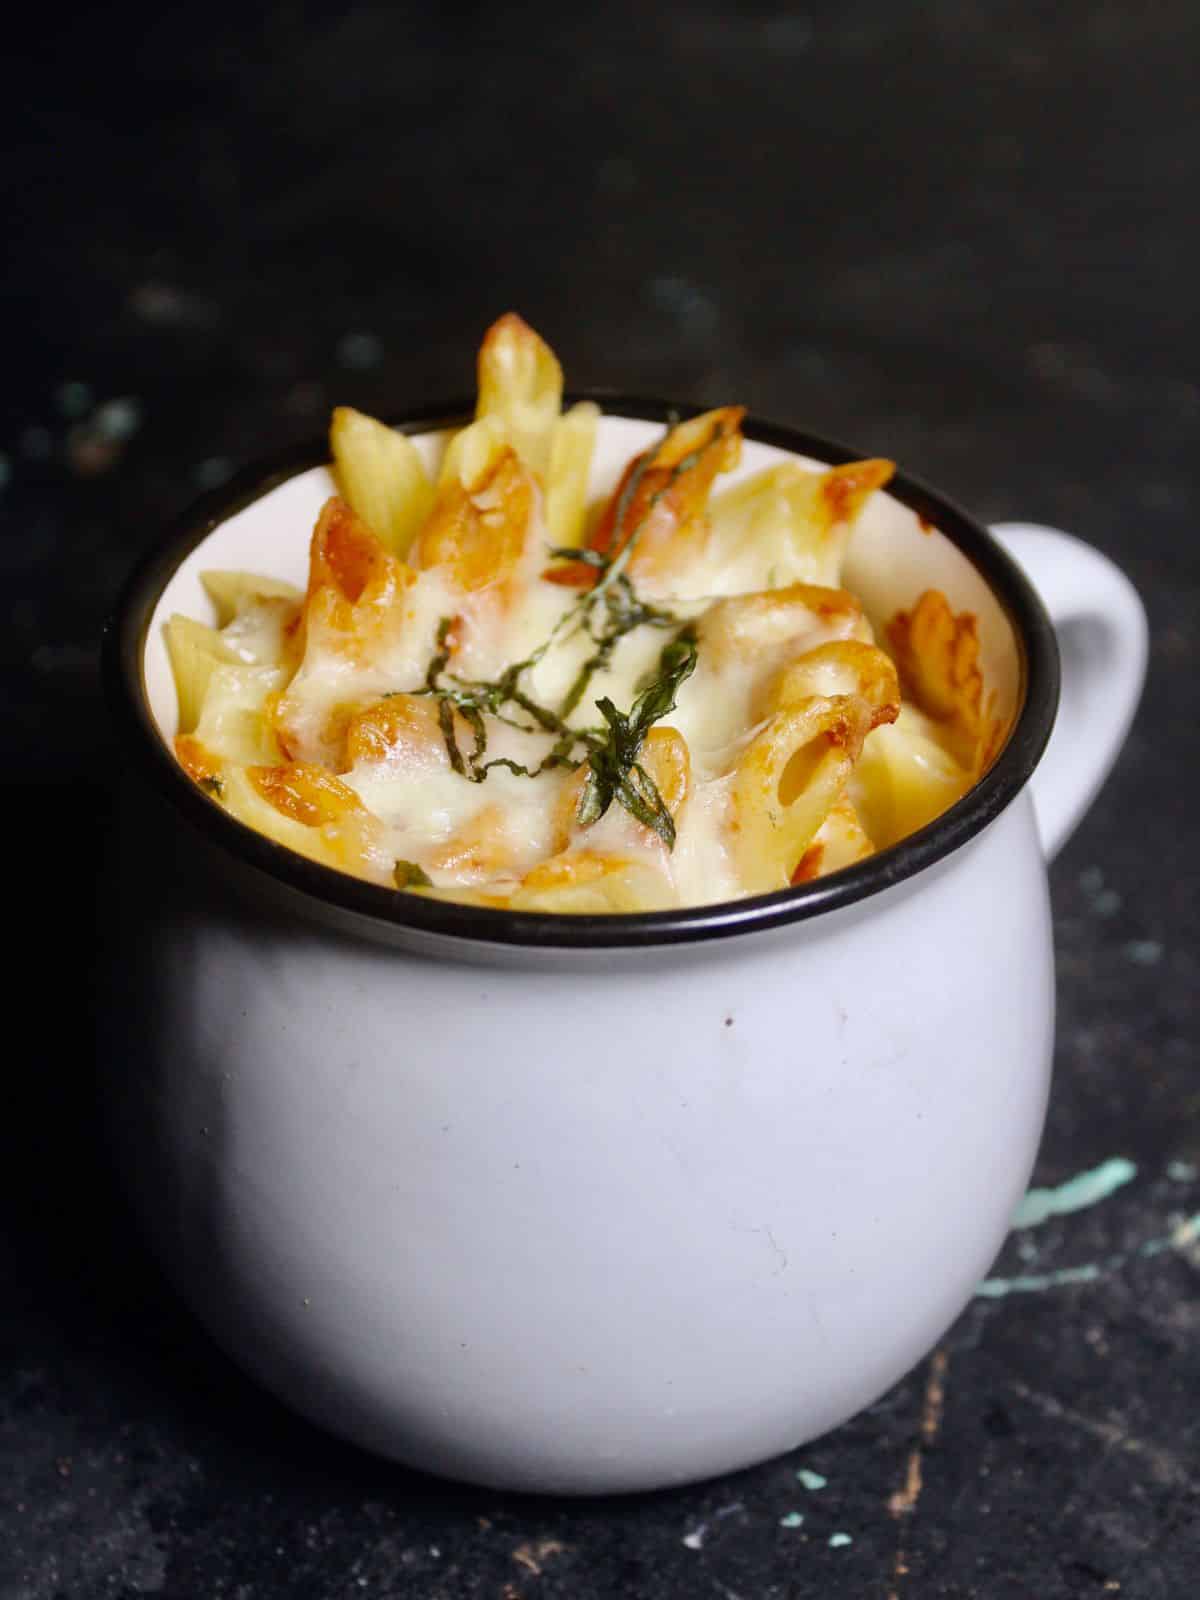 Yummy Baked Penne Pasta in a Cup